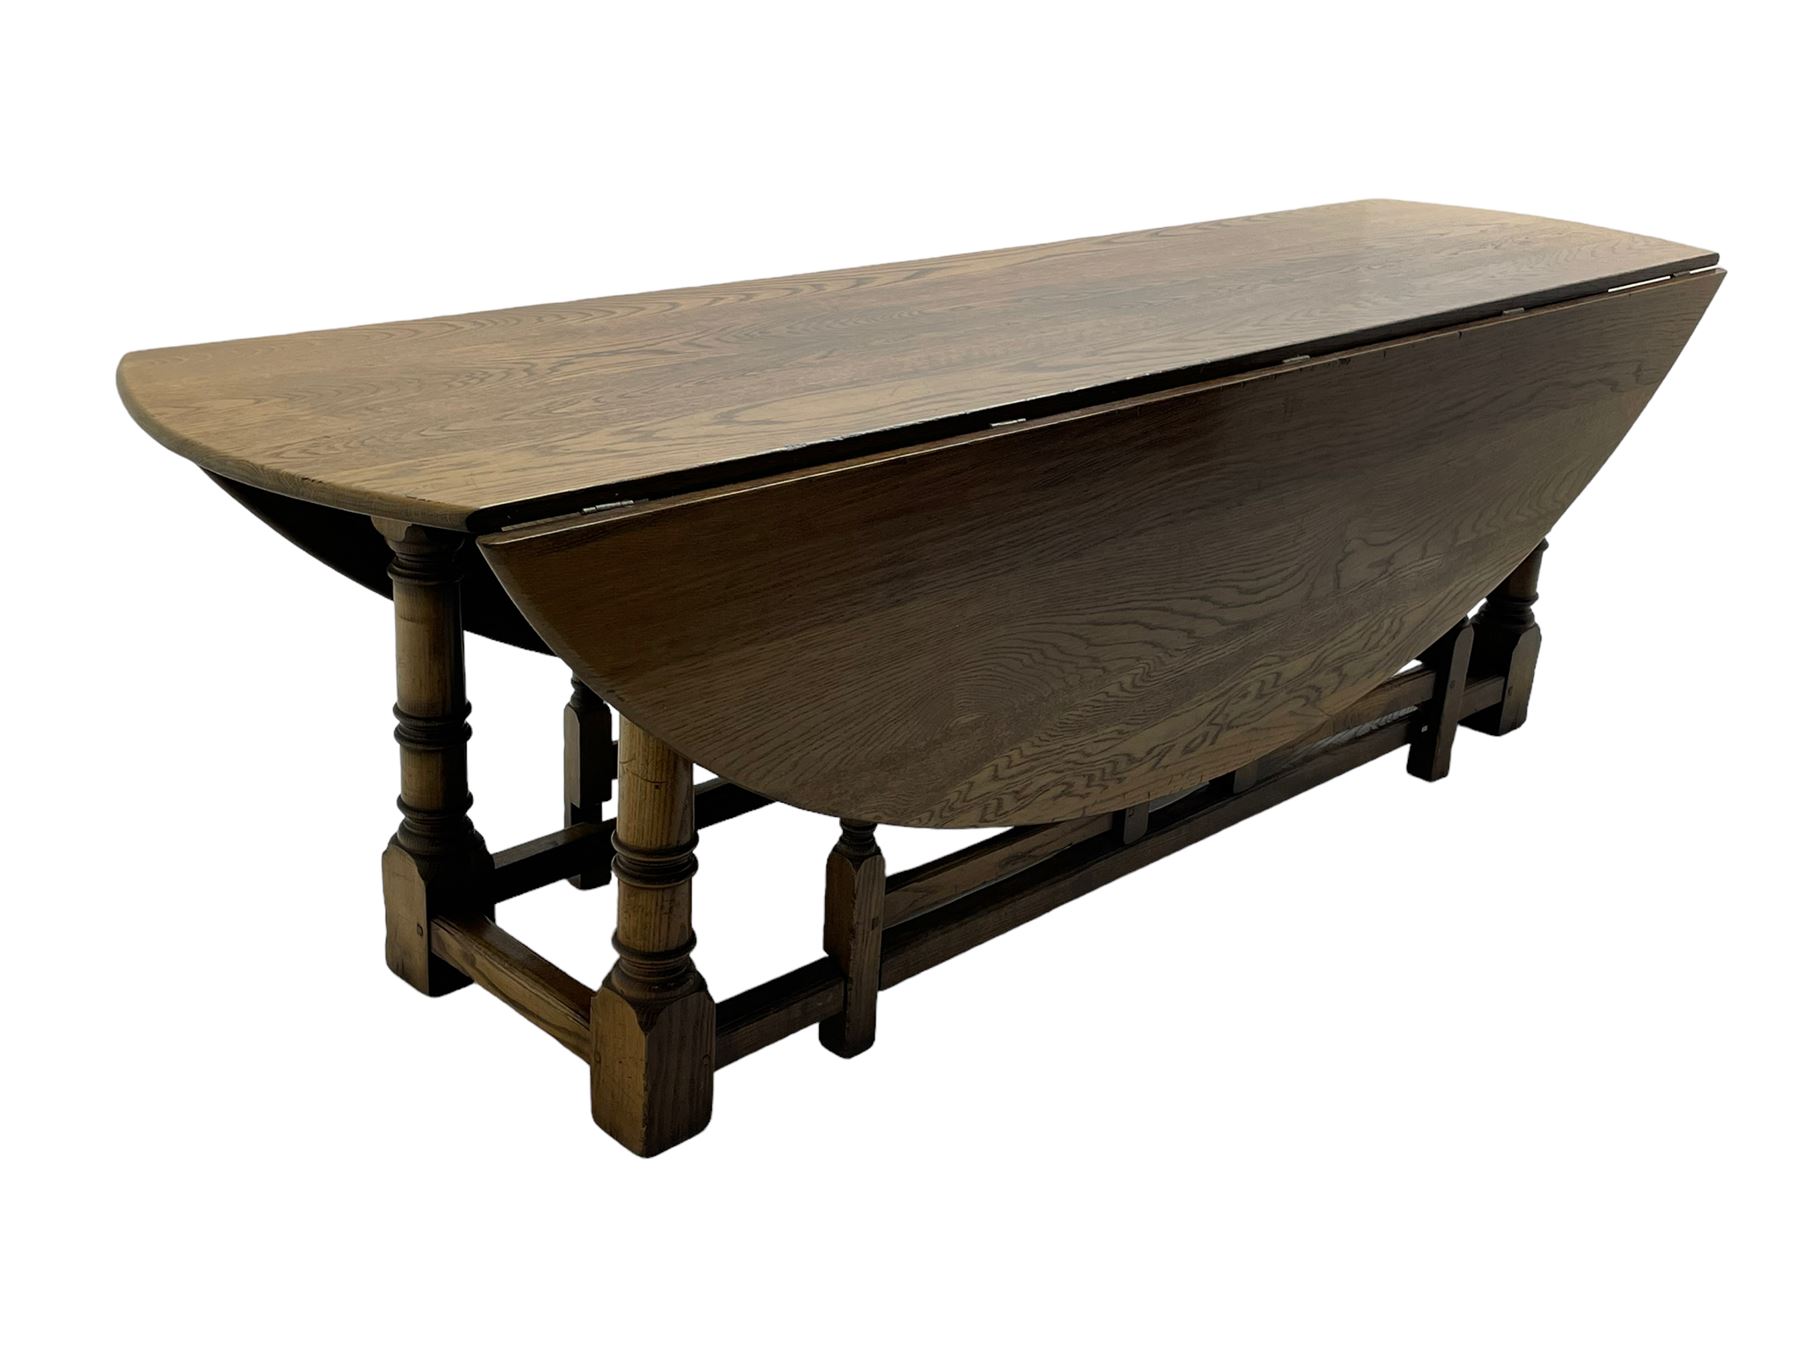 Large 18th century design oak wake or dining table - Image 12 of 12